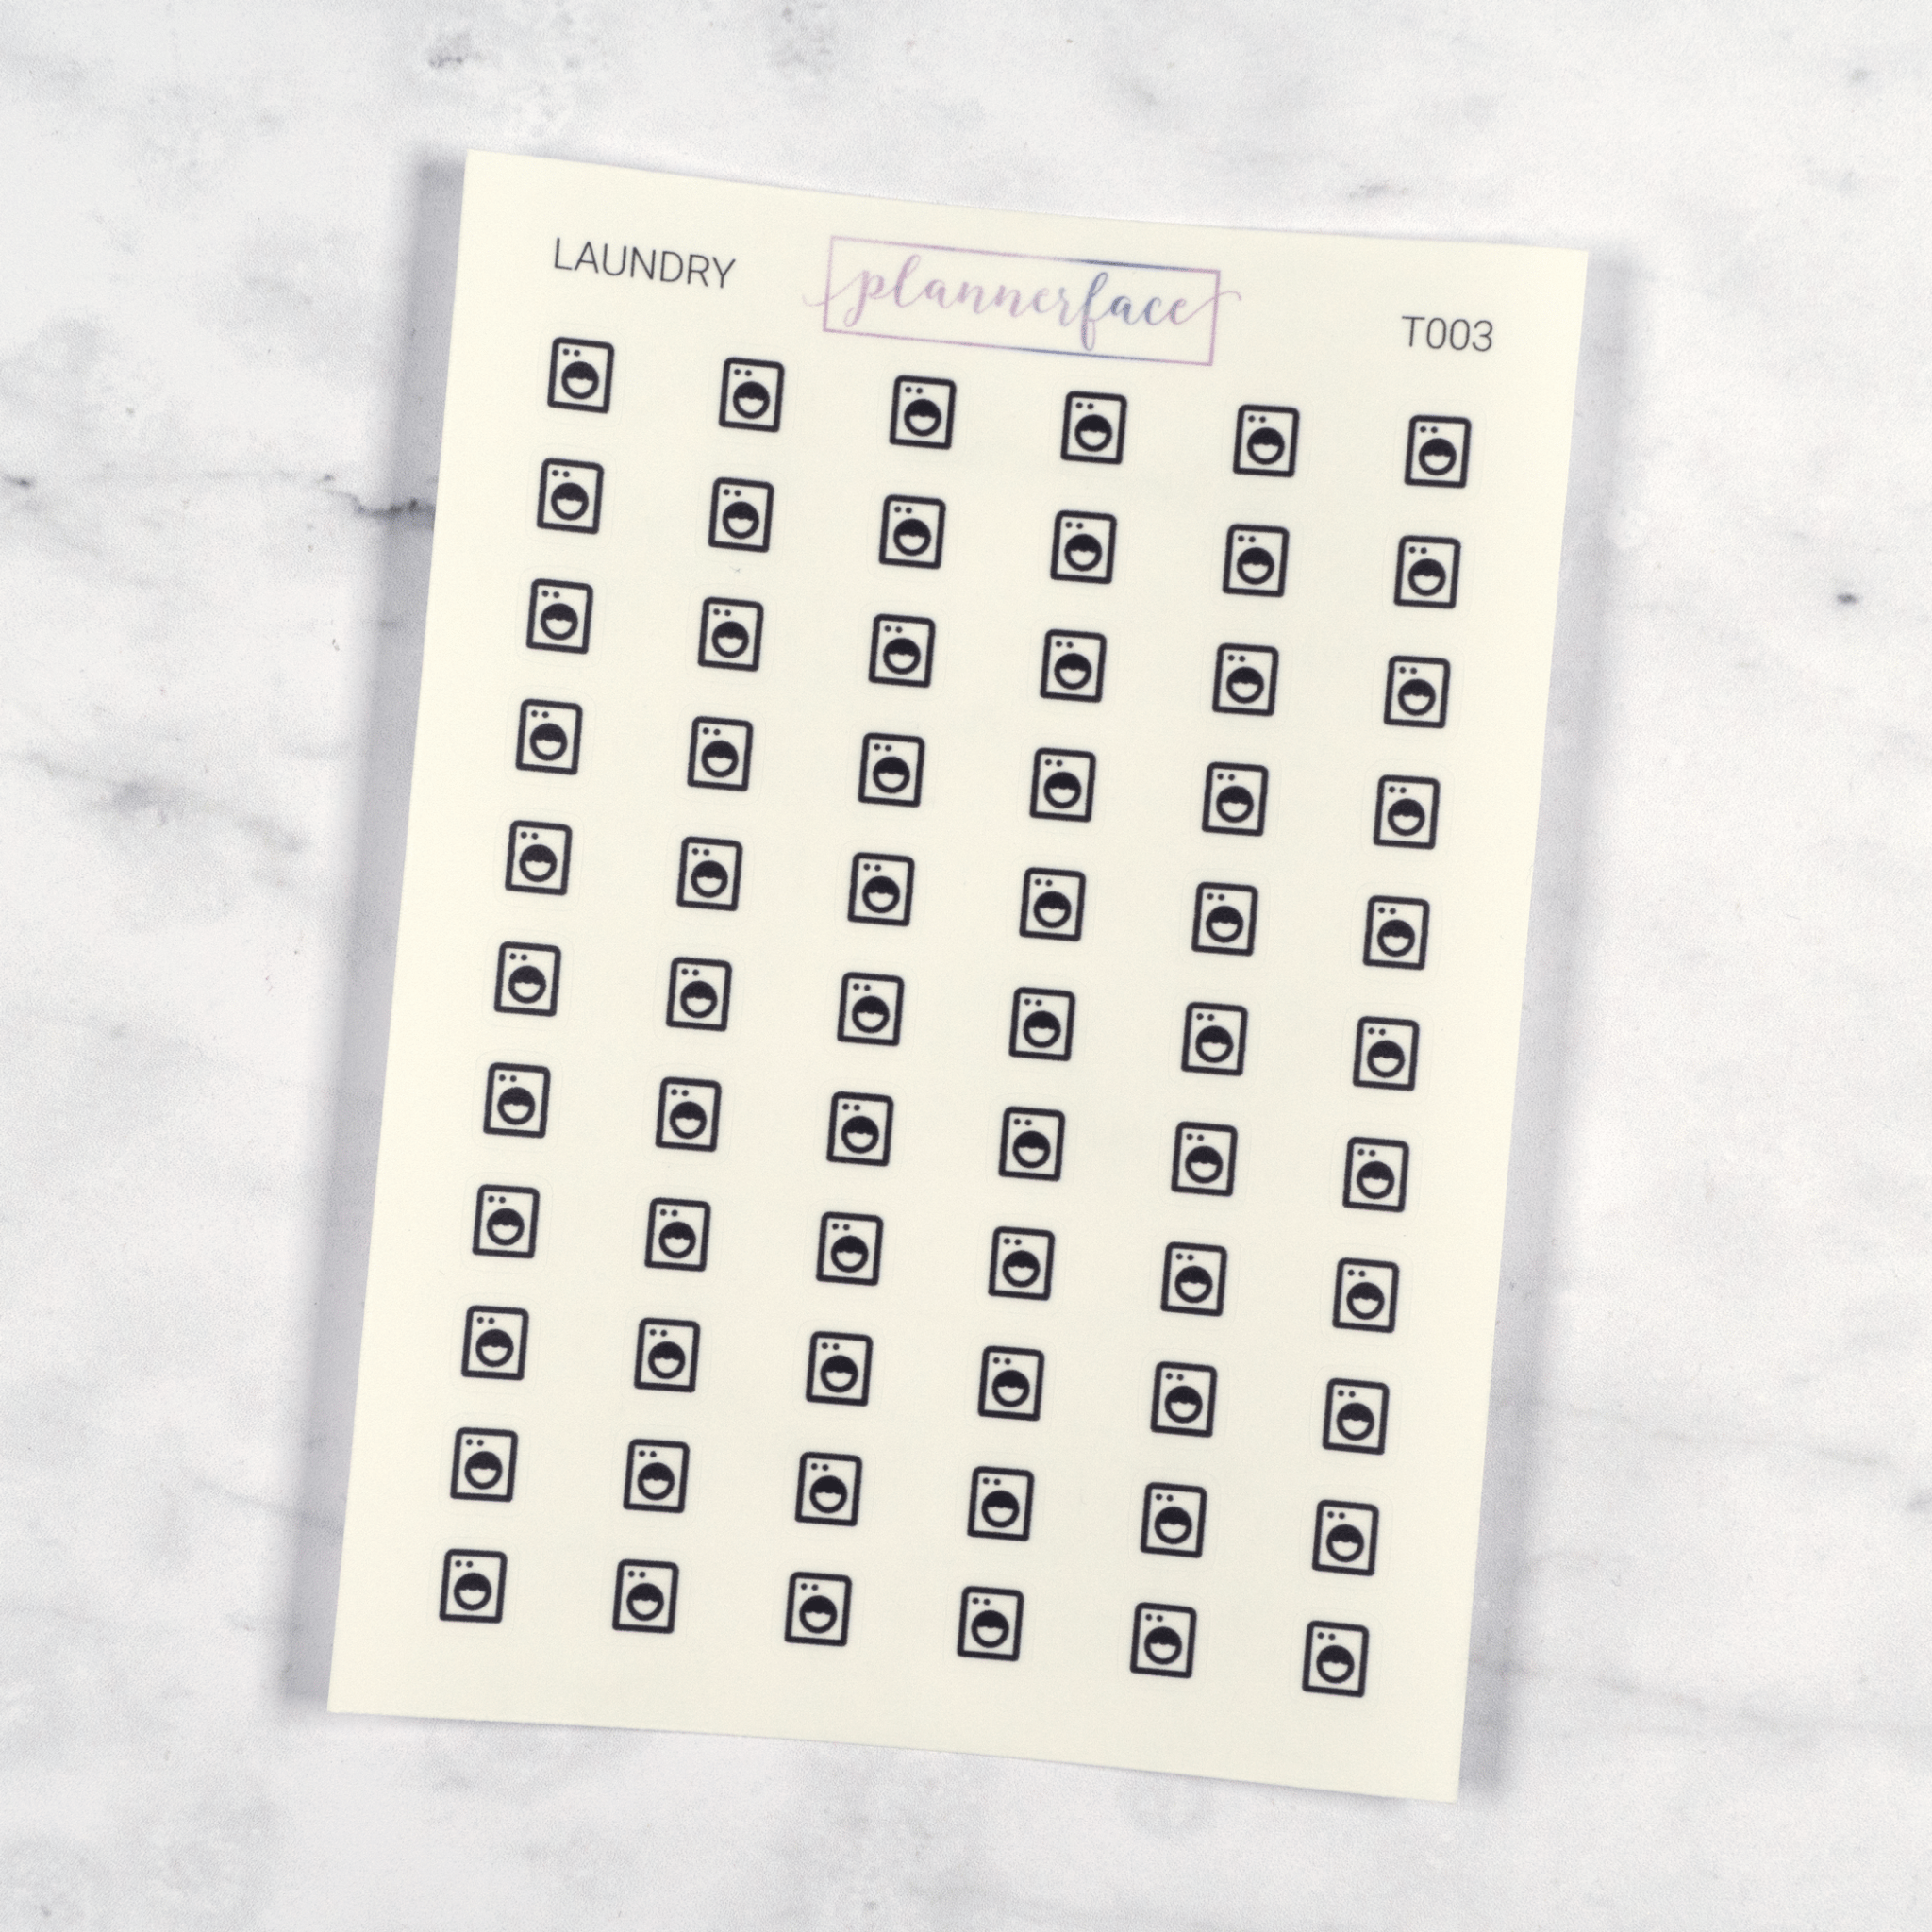 Laundry Transparent Icon Stickers by Plannerface